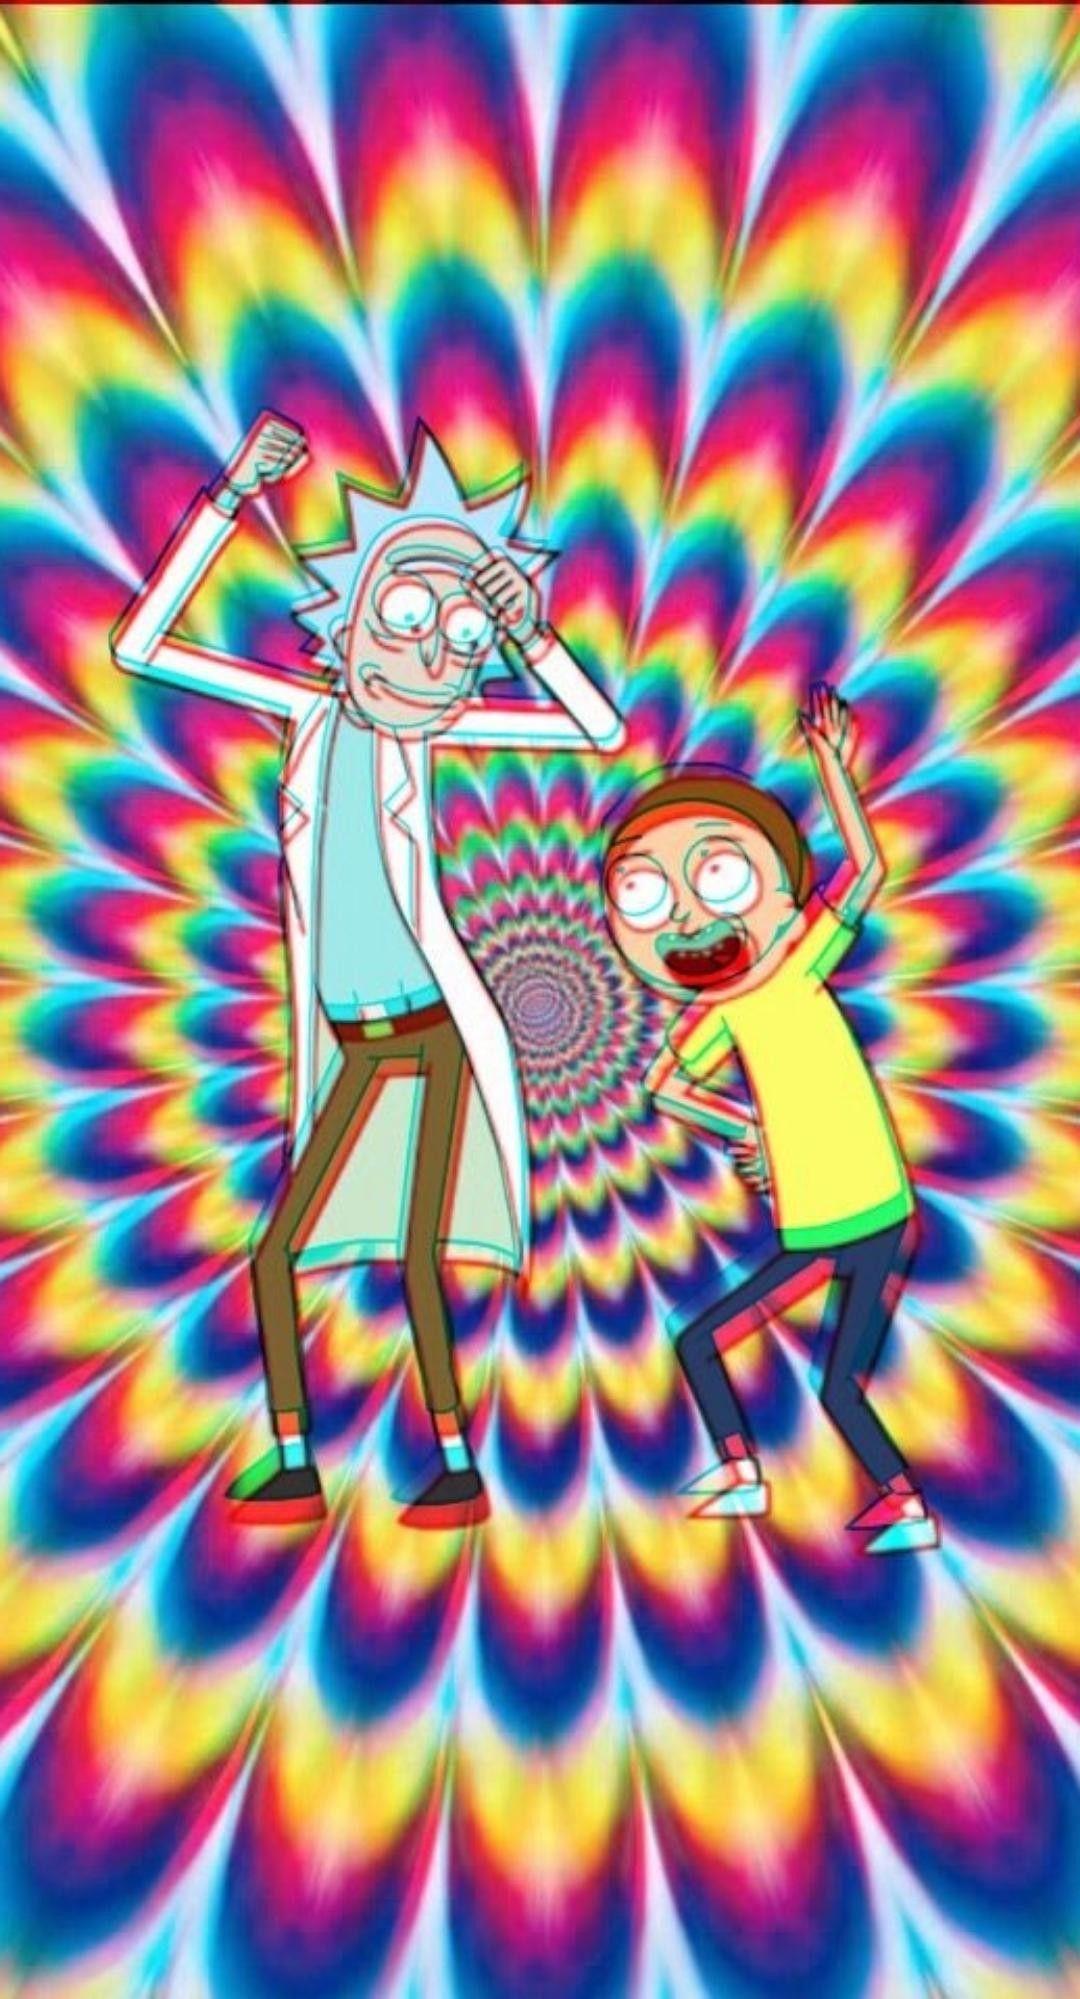 Rick and Morty Weed Wallpapers - Top Free Rick and Morty ...